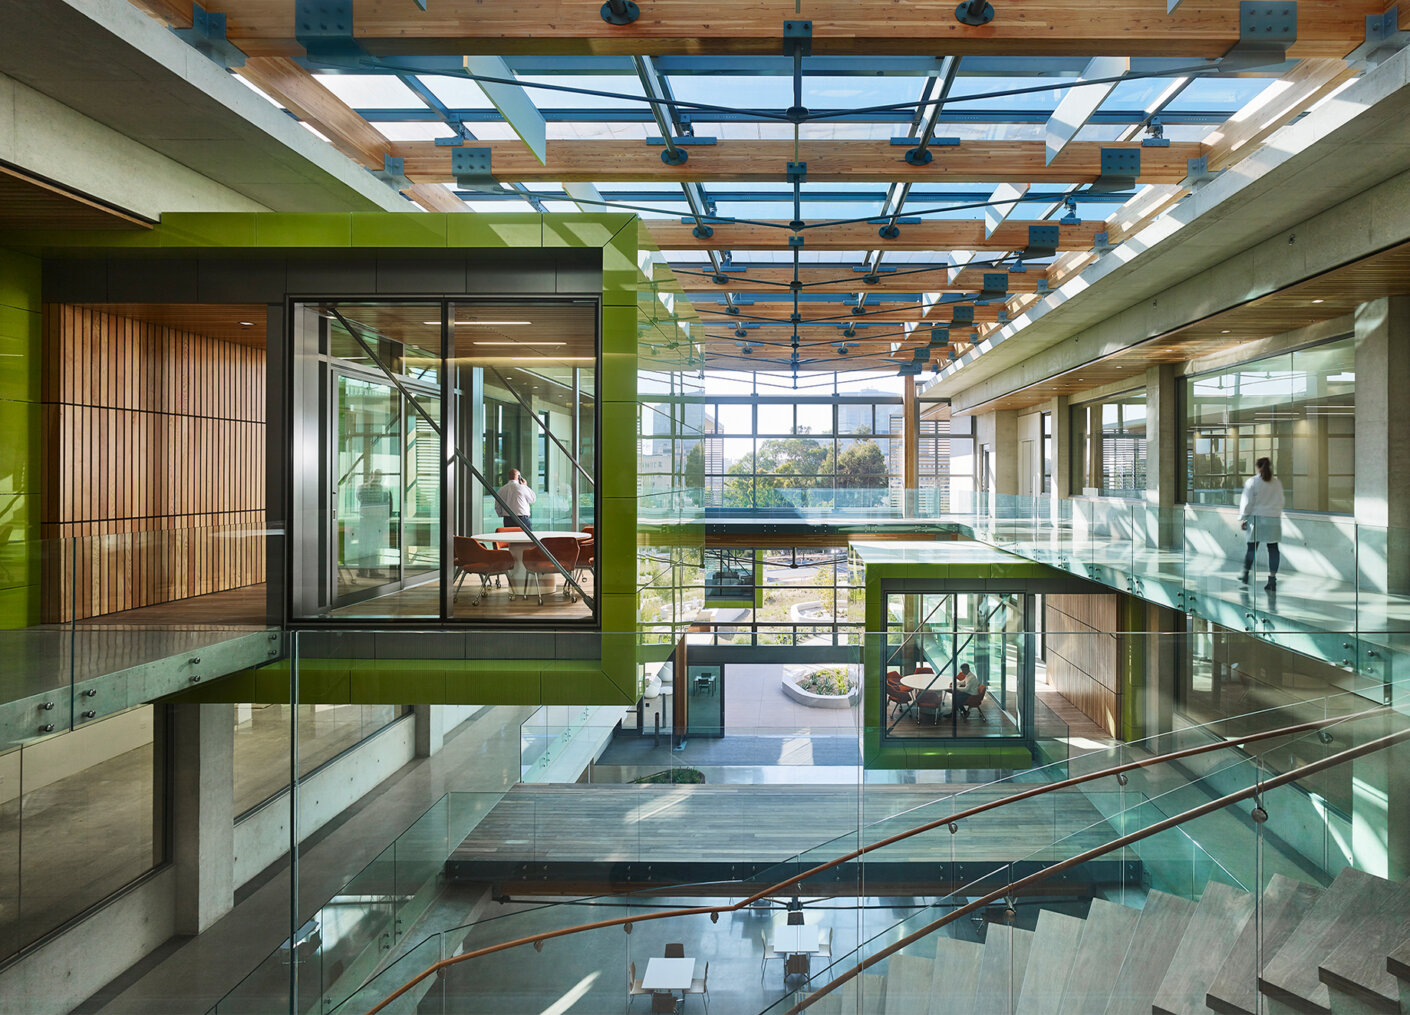 Two green meeting pods hang into atrium with large glass ceiling above.